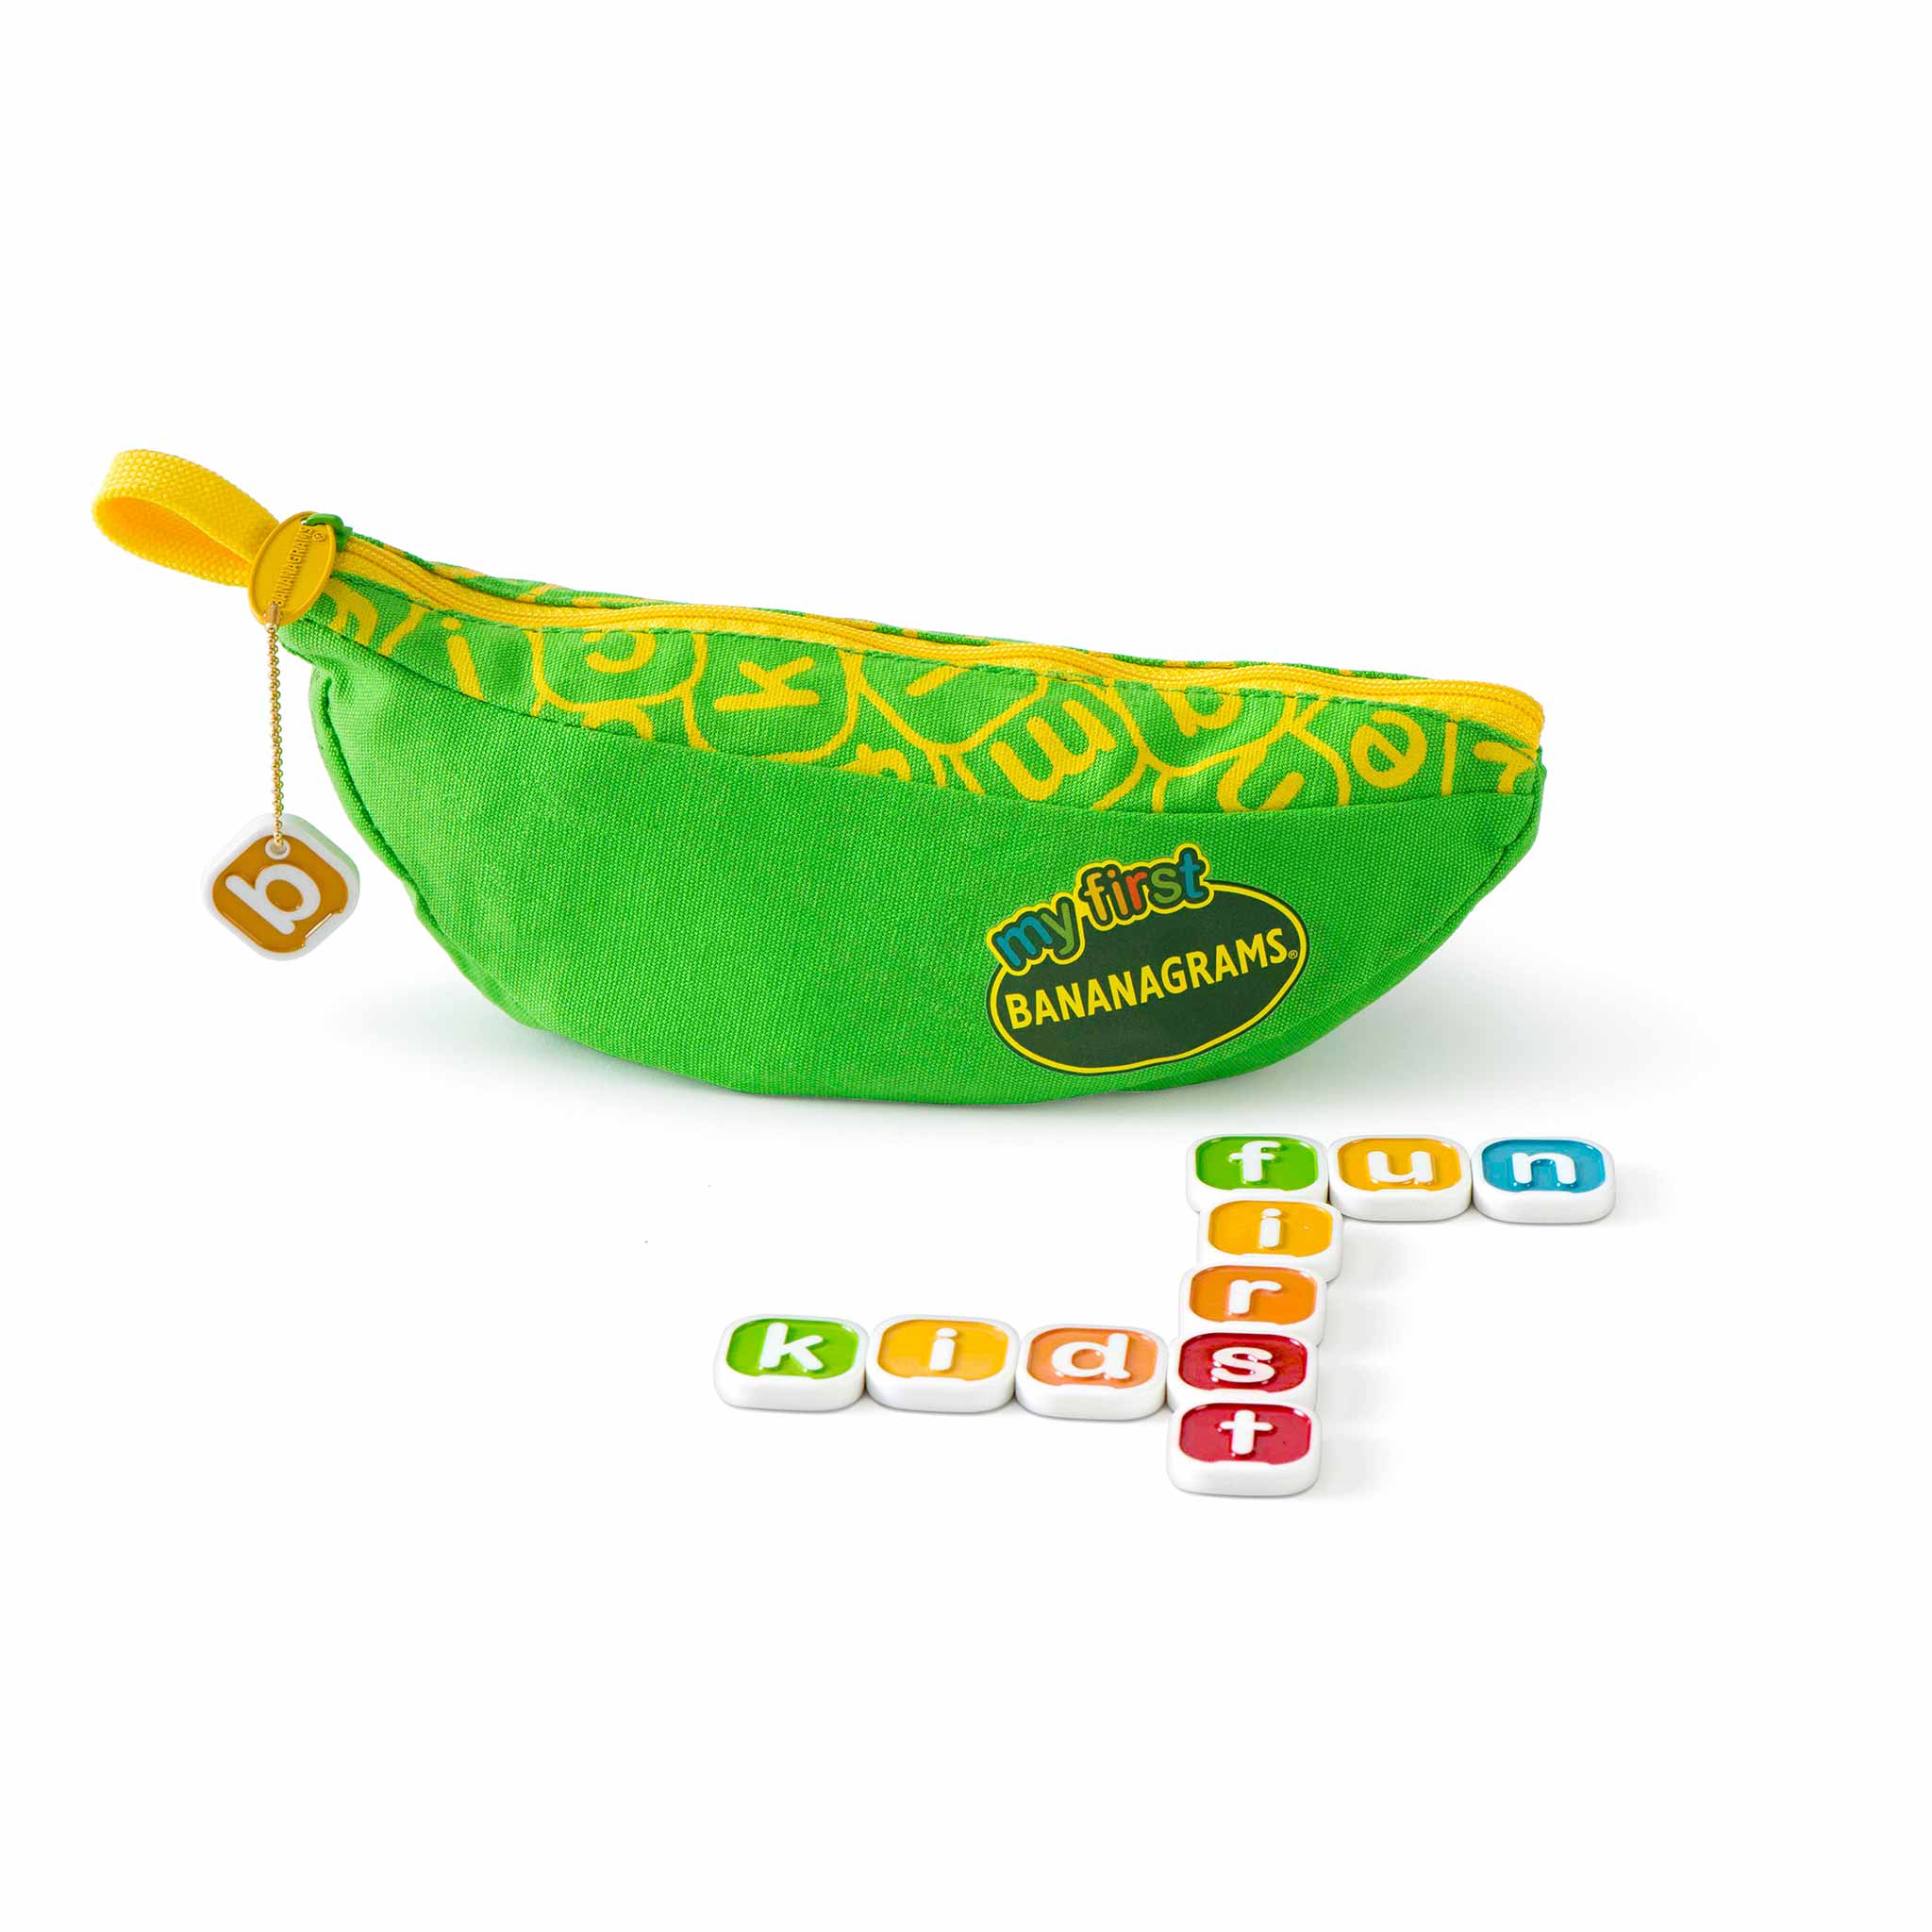 My First Bananagrams pouch and tiles